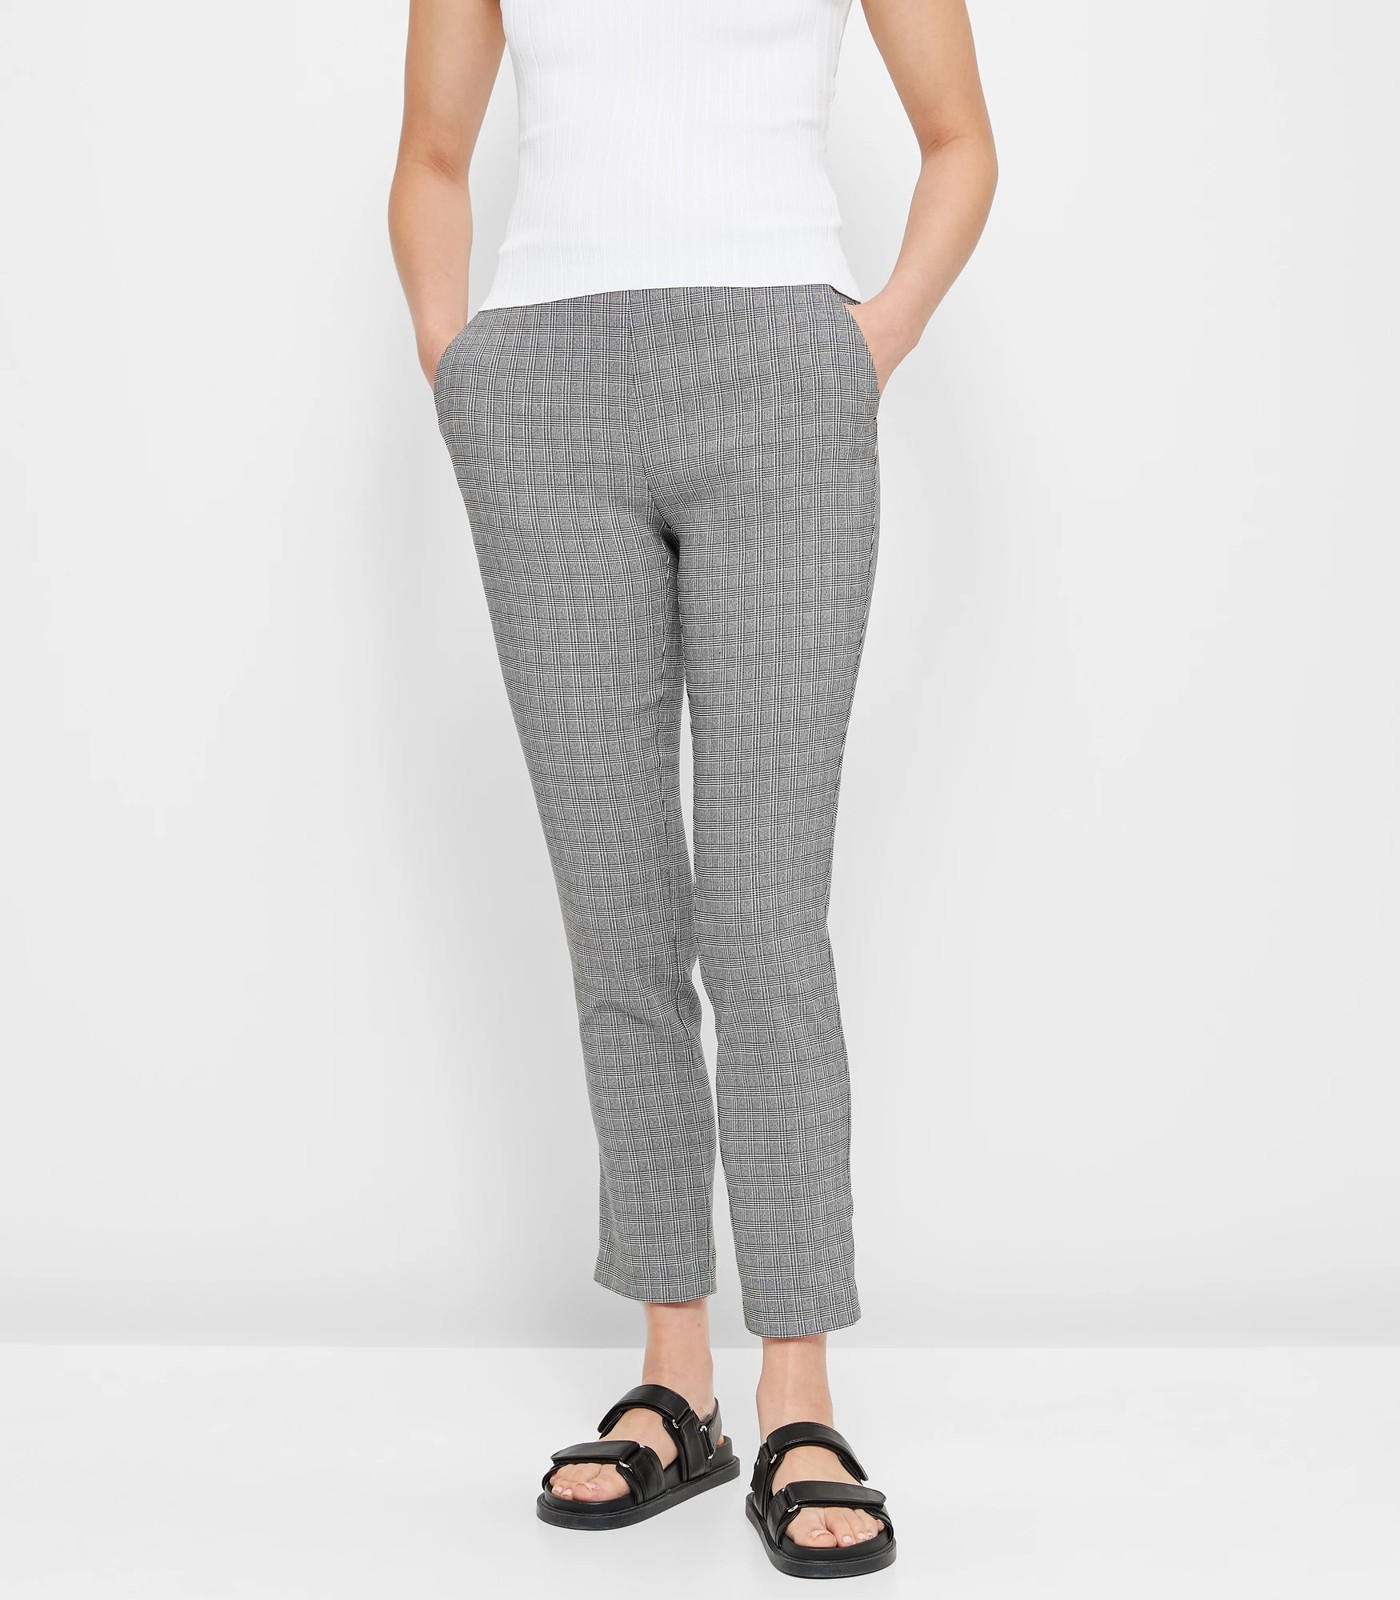 Ankle Length Bengaline Pants - Preview - Monochrome Check